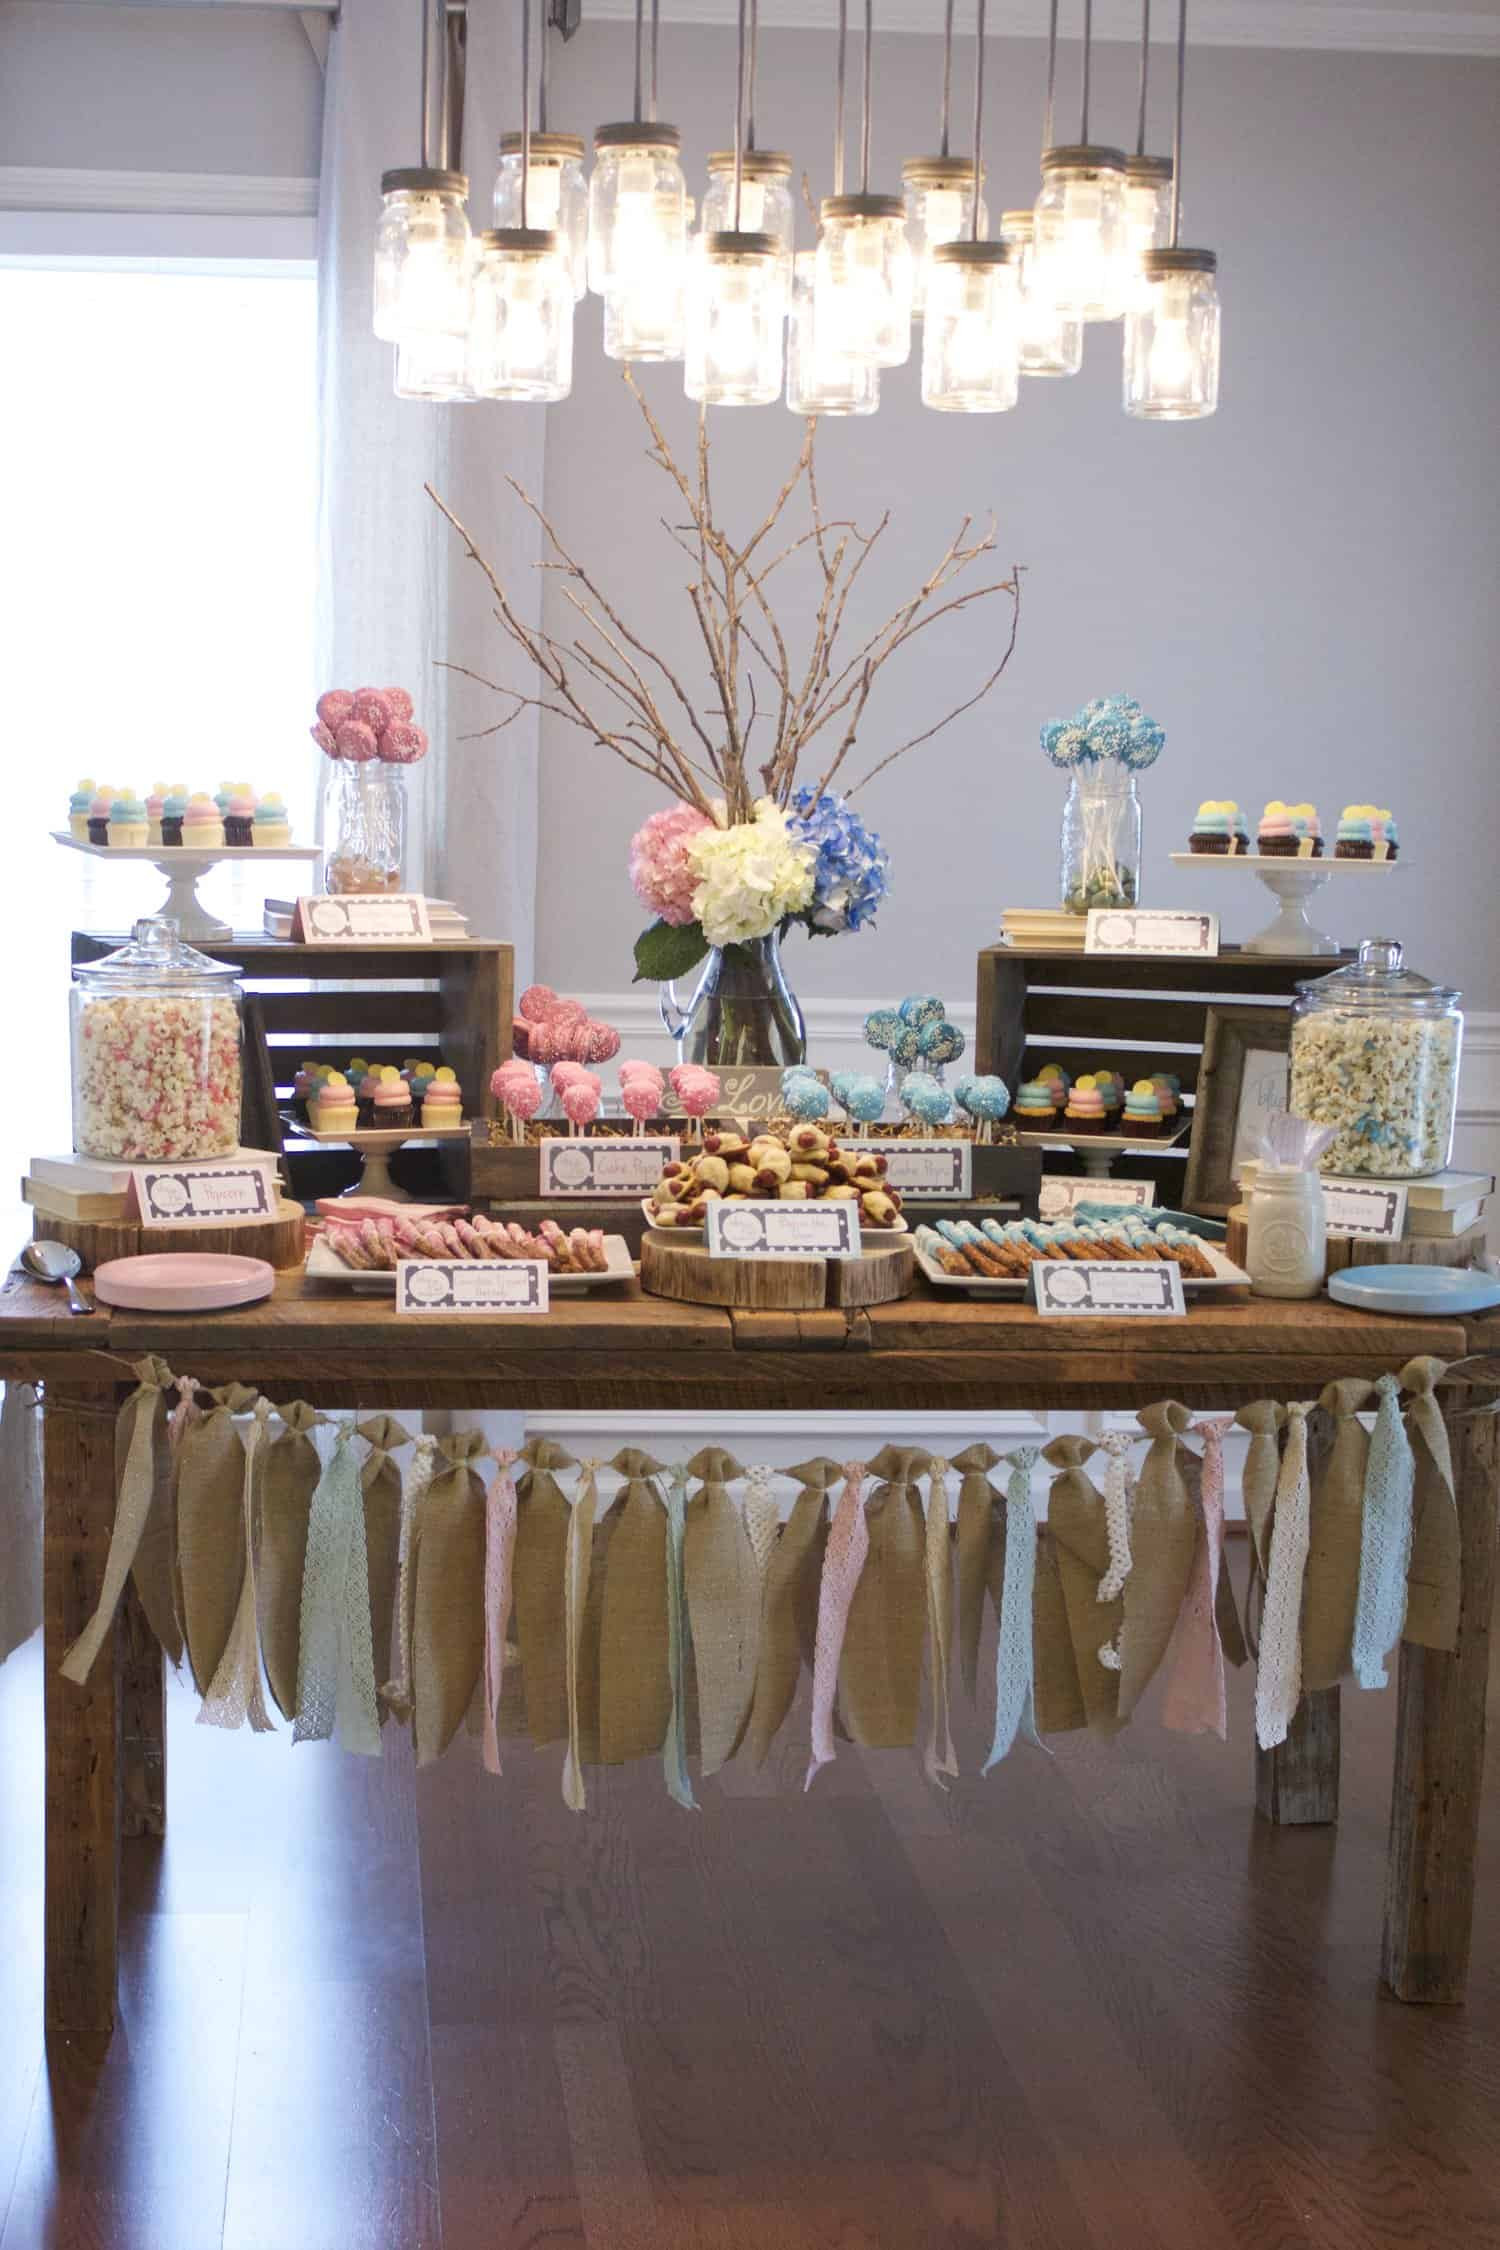 Cute Gender Reveal Party Ideas
 17 Tips To Throw An Unfor table Gender Reveal Party